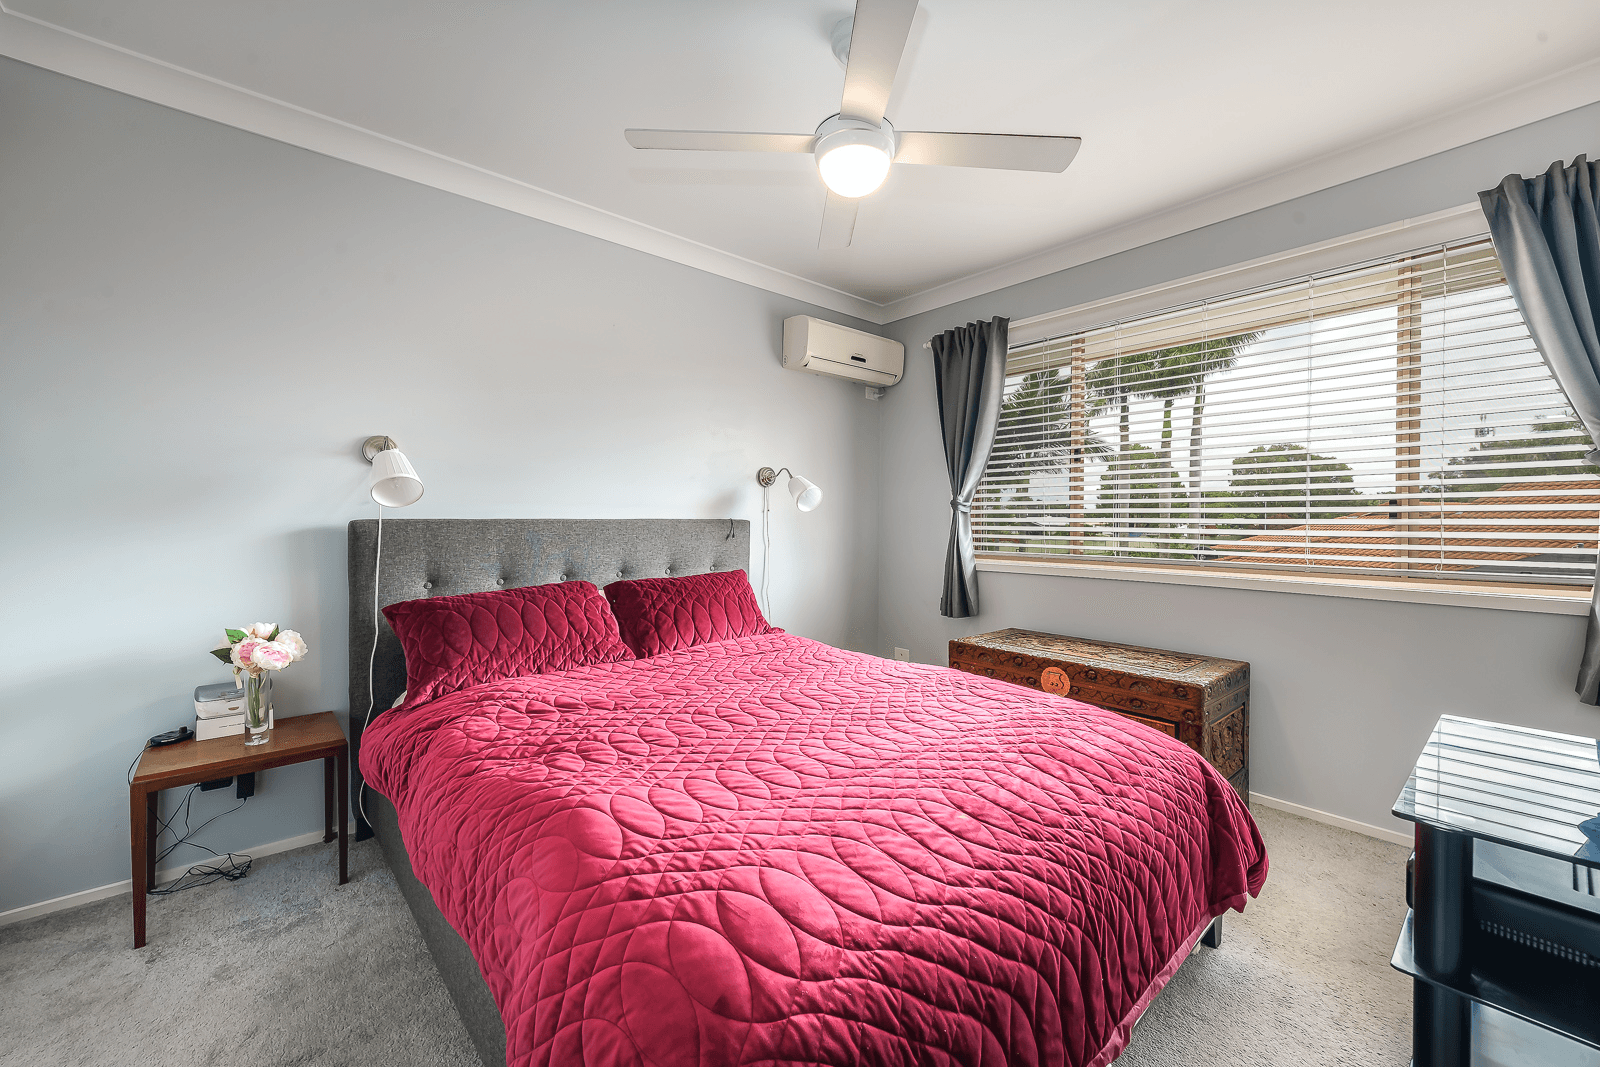 30/272 Oxley Drive, COOMBABAH, QLD 4216